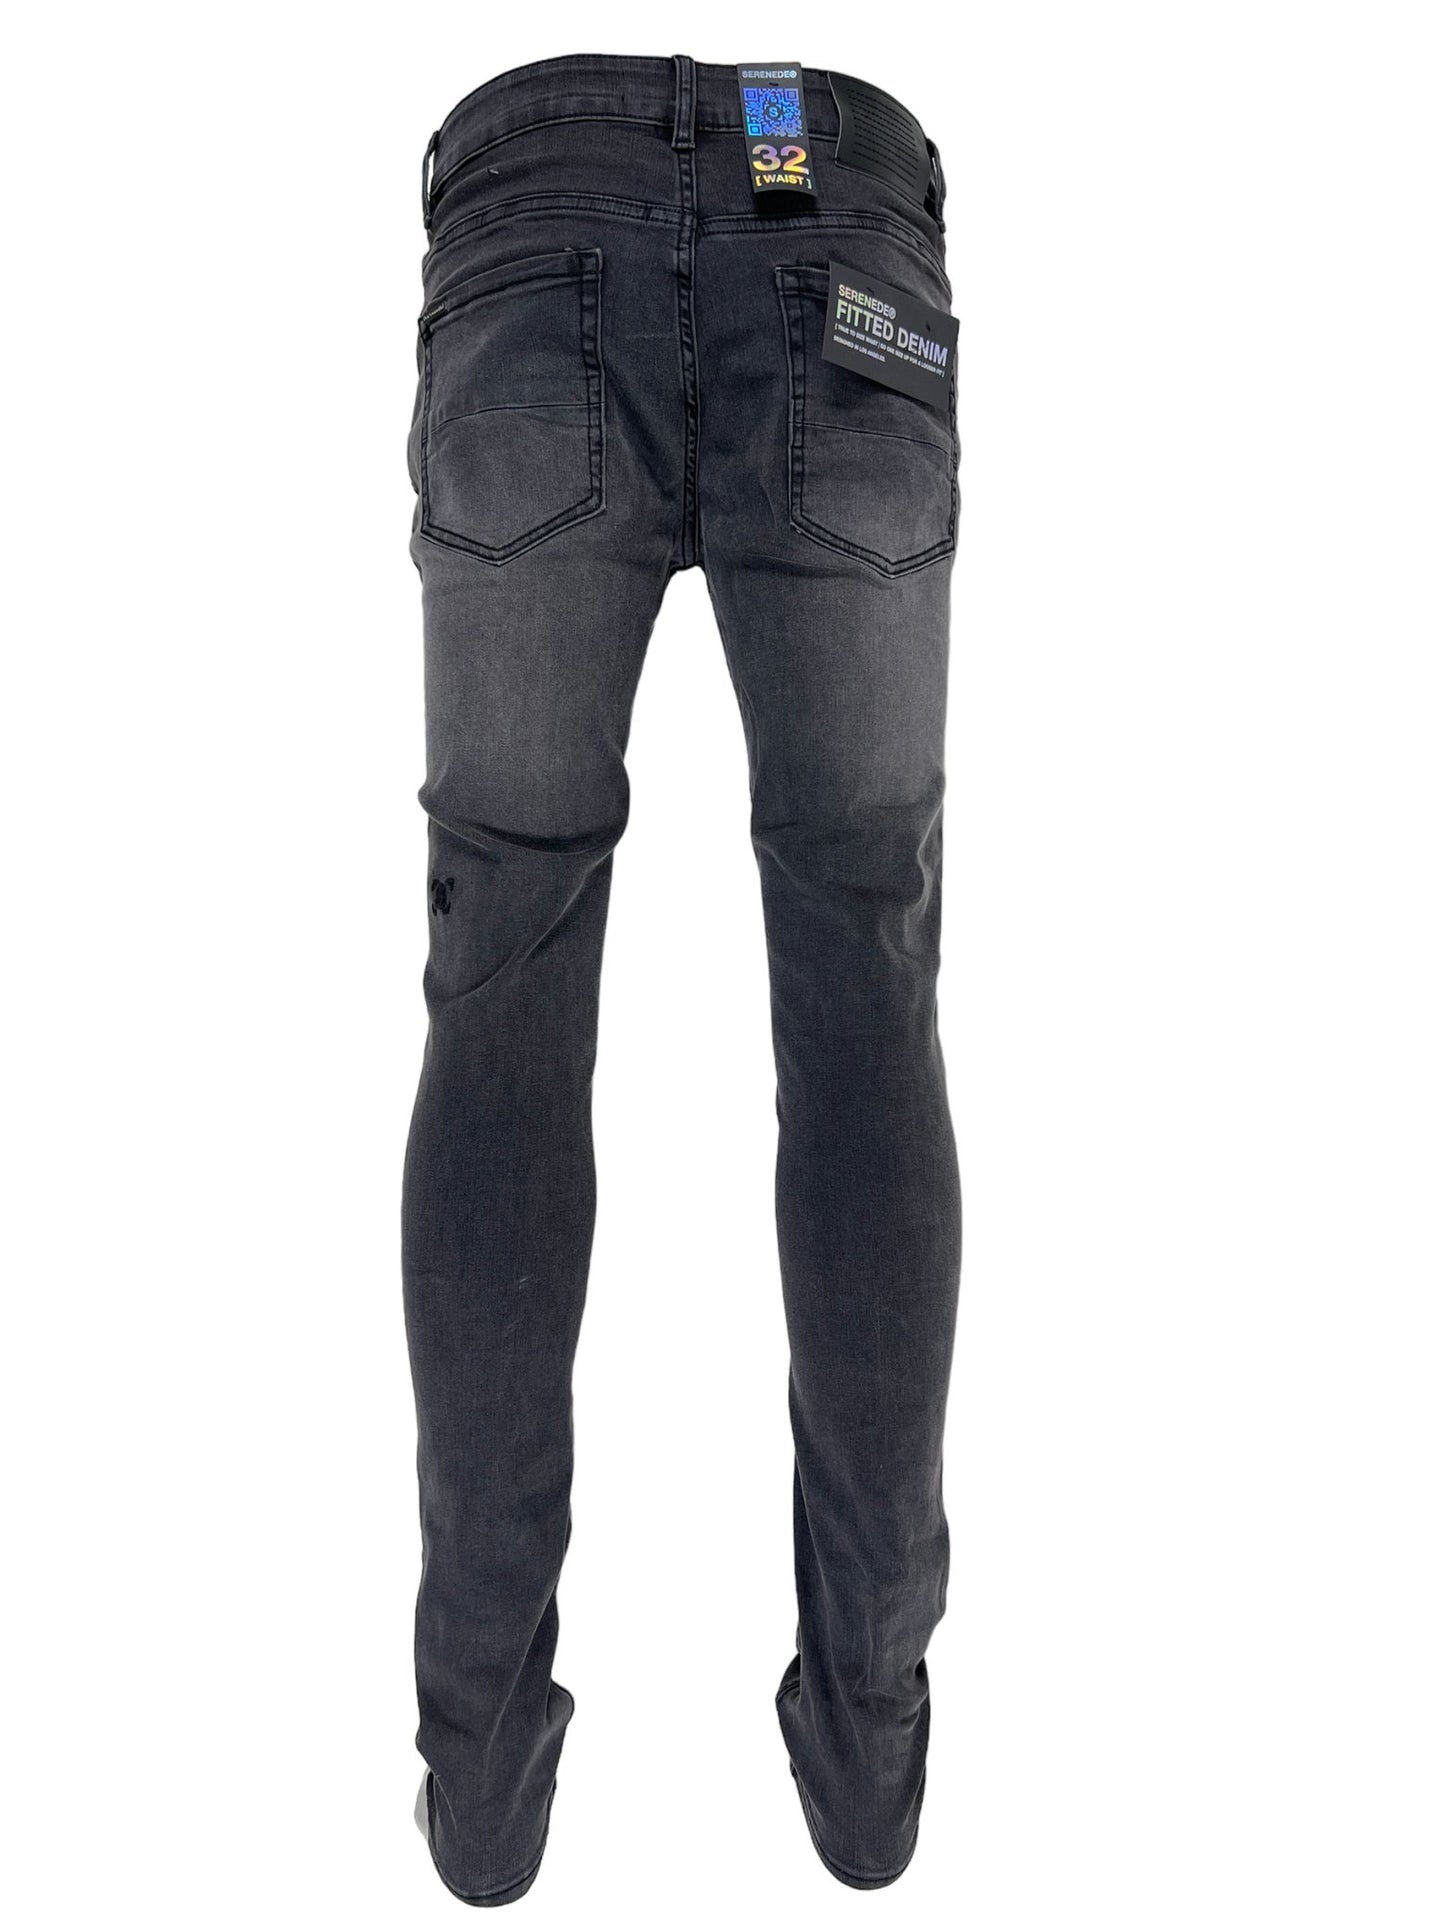 Probus SERENEDE SHADOW 33 JEANS COAL SERENEDE SHADOW 33 JEANS COAL COAL